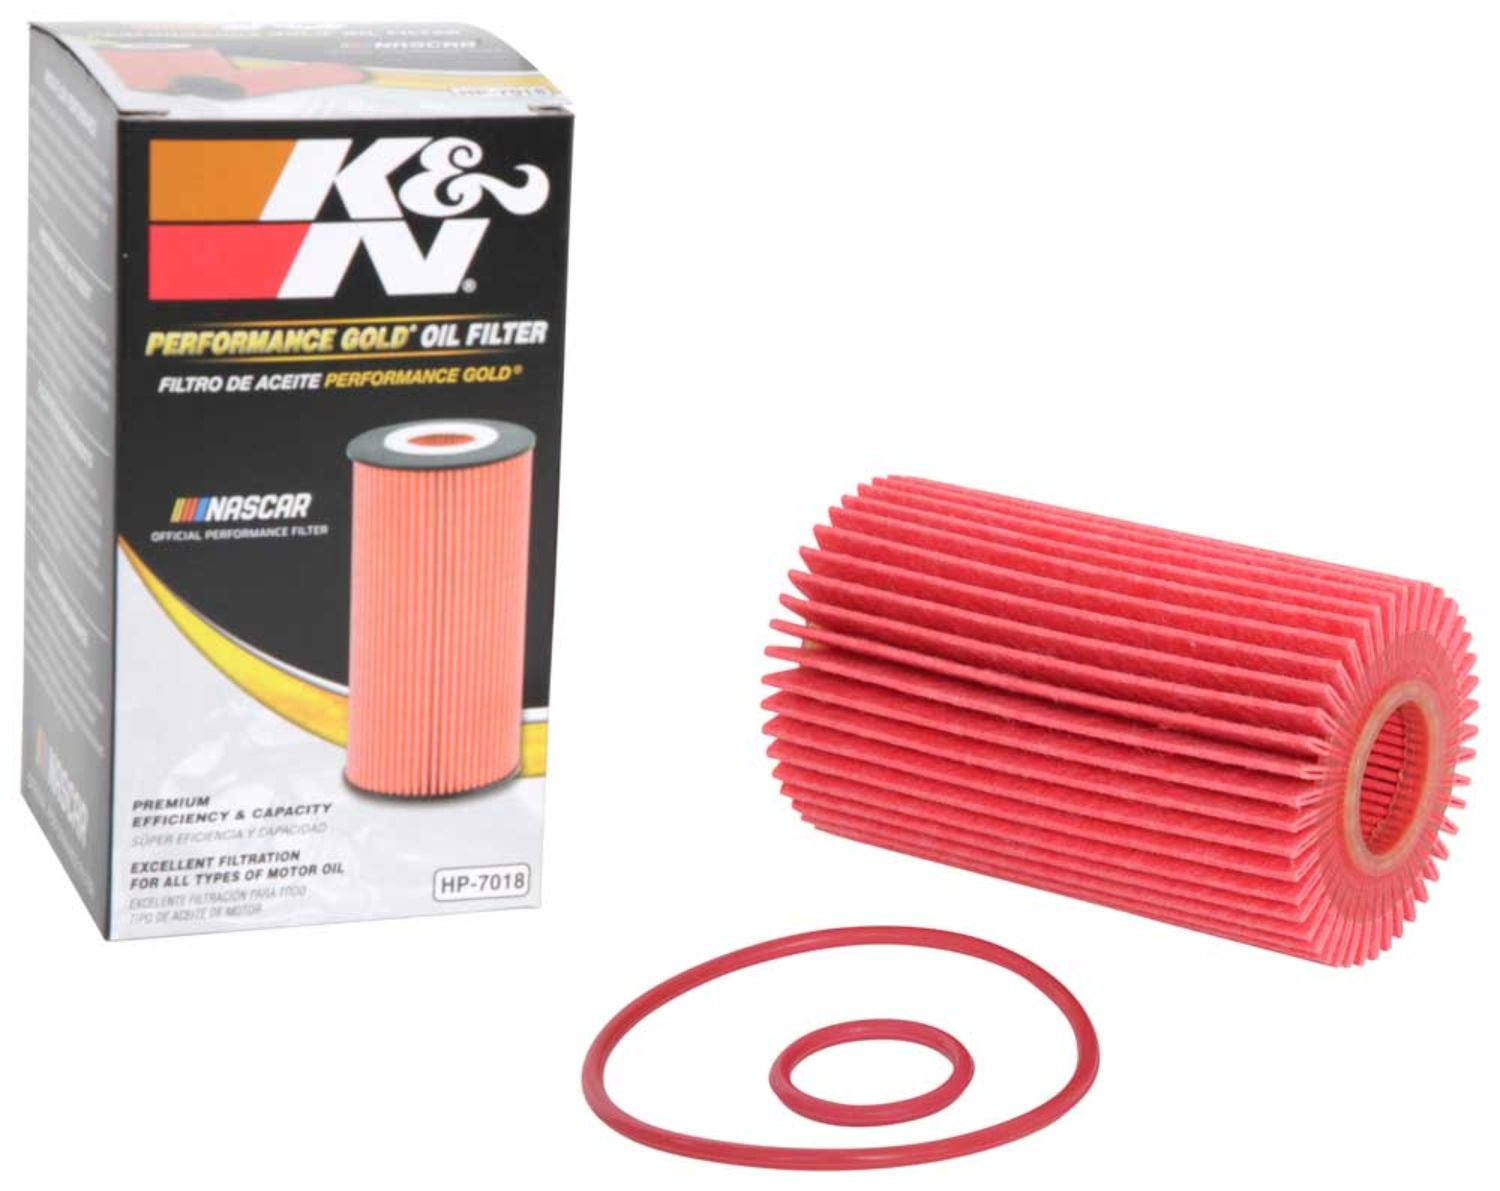 Engine Oil Filter for Lexus GS IS RC F LX570 Land Cruiser Tundra Sequoia V8